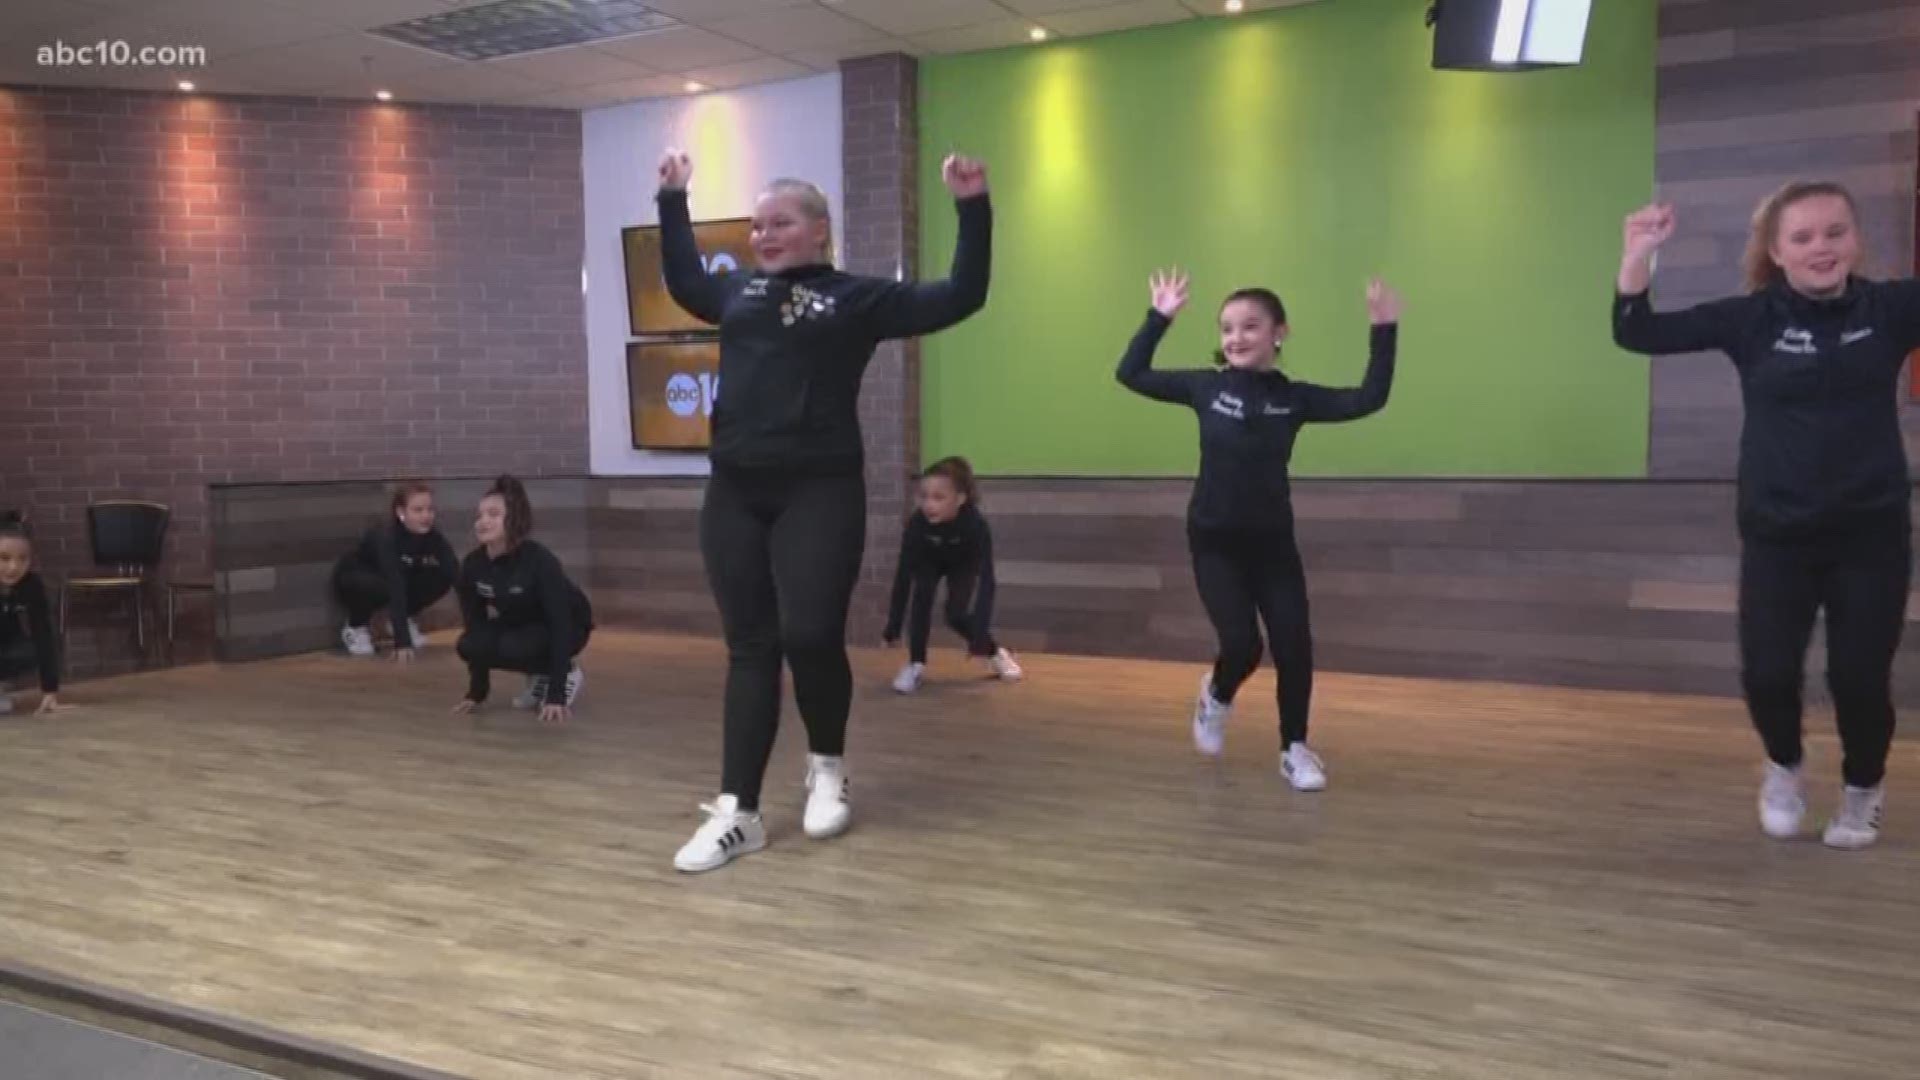 Elizabeth Ercila, owner of Fancy Feet Dance Academy, talks about a free community dance event happening Saturday, February 16, while some of her students bust a move!